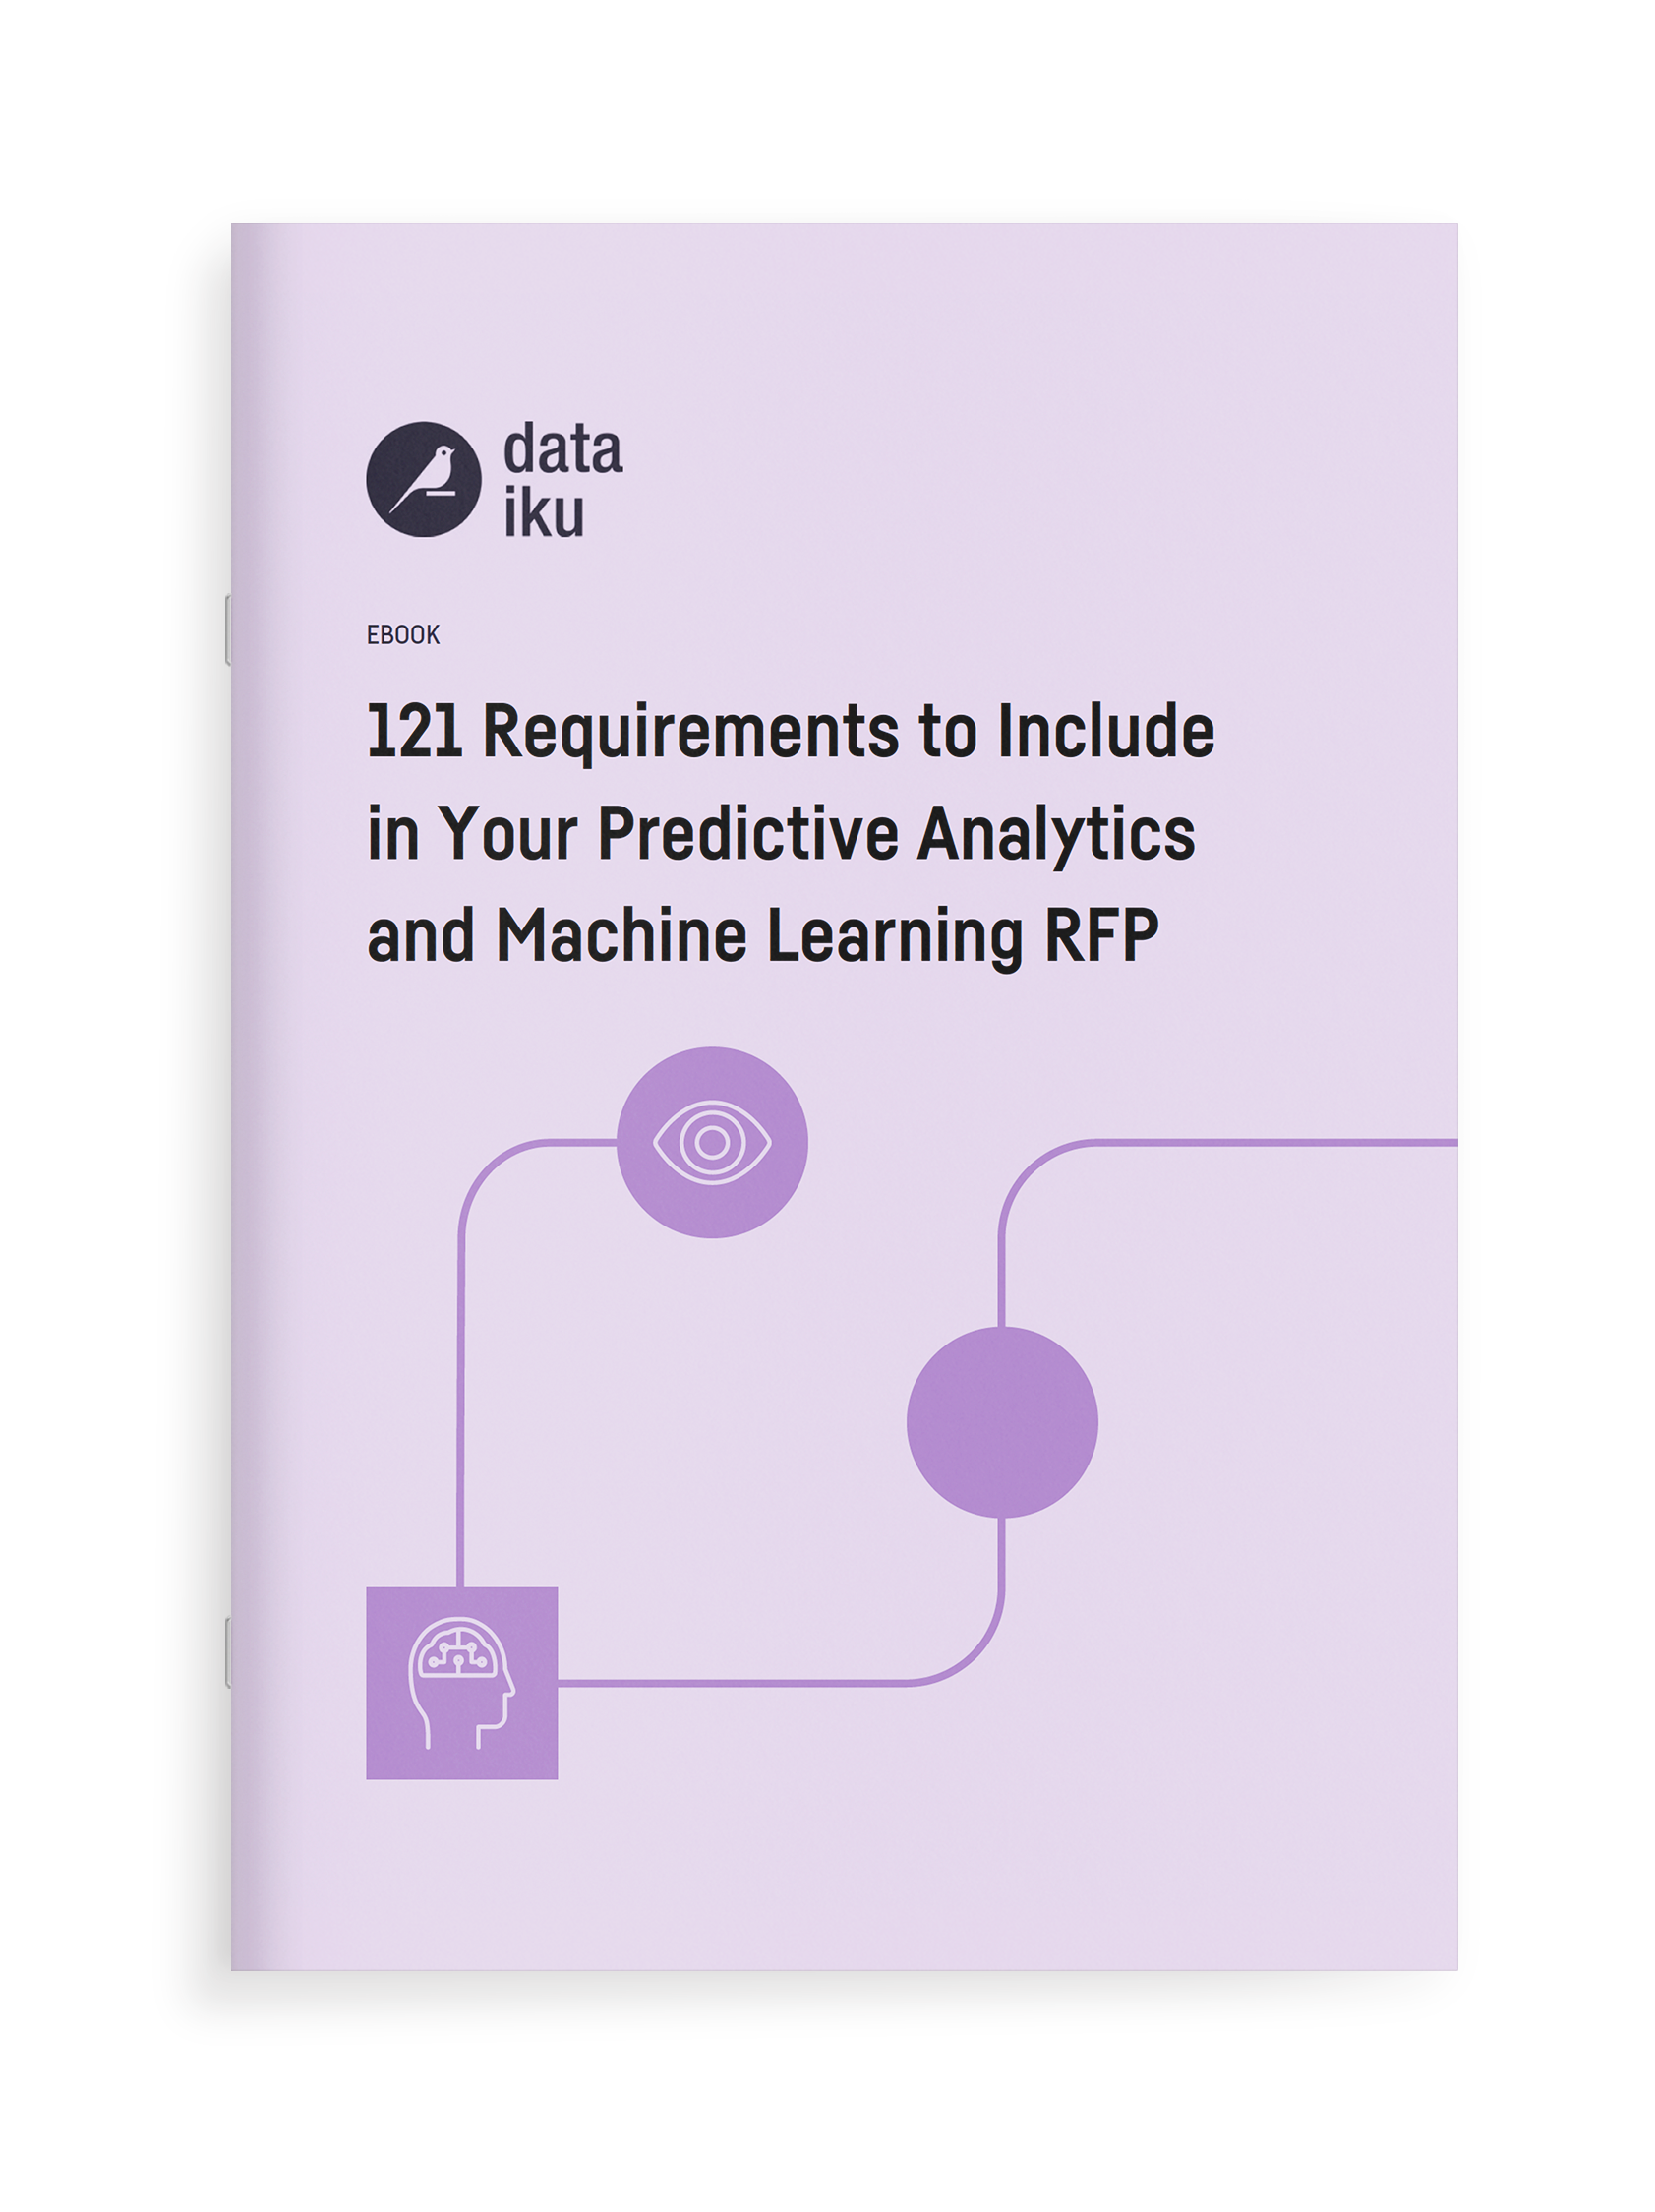 121 Requirements to Include in Your Predictive Analytics and Machine Learning RFP_Mockup